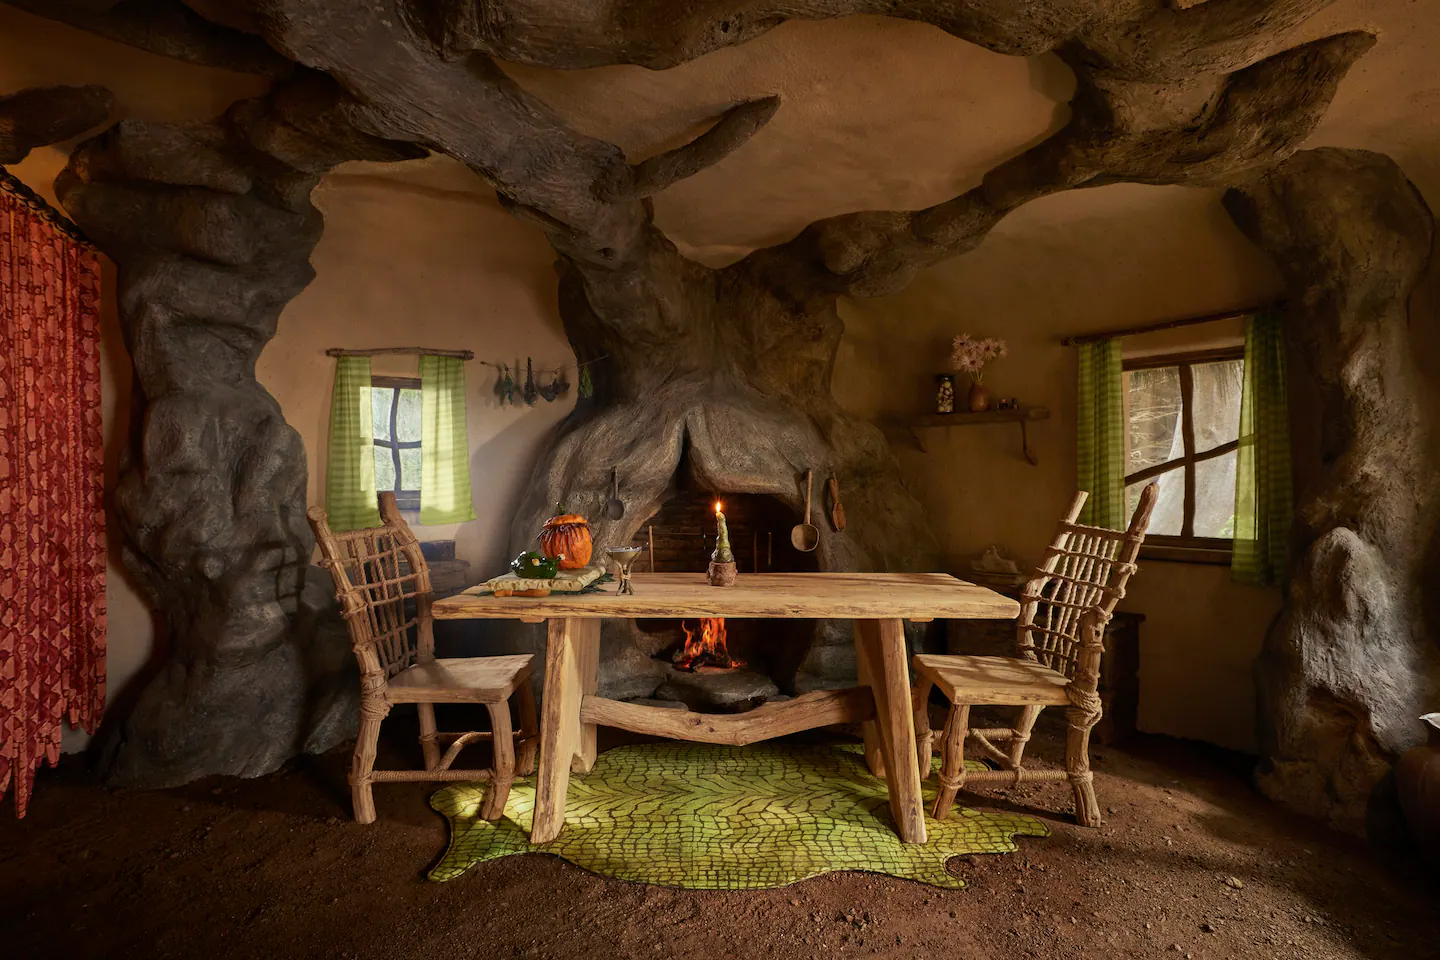 The interior of Shrek's Swamp on Airbnb.